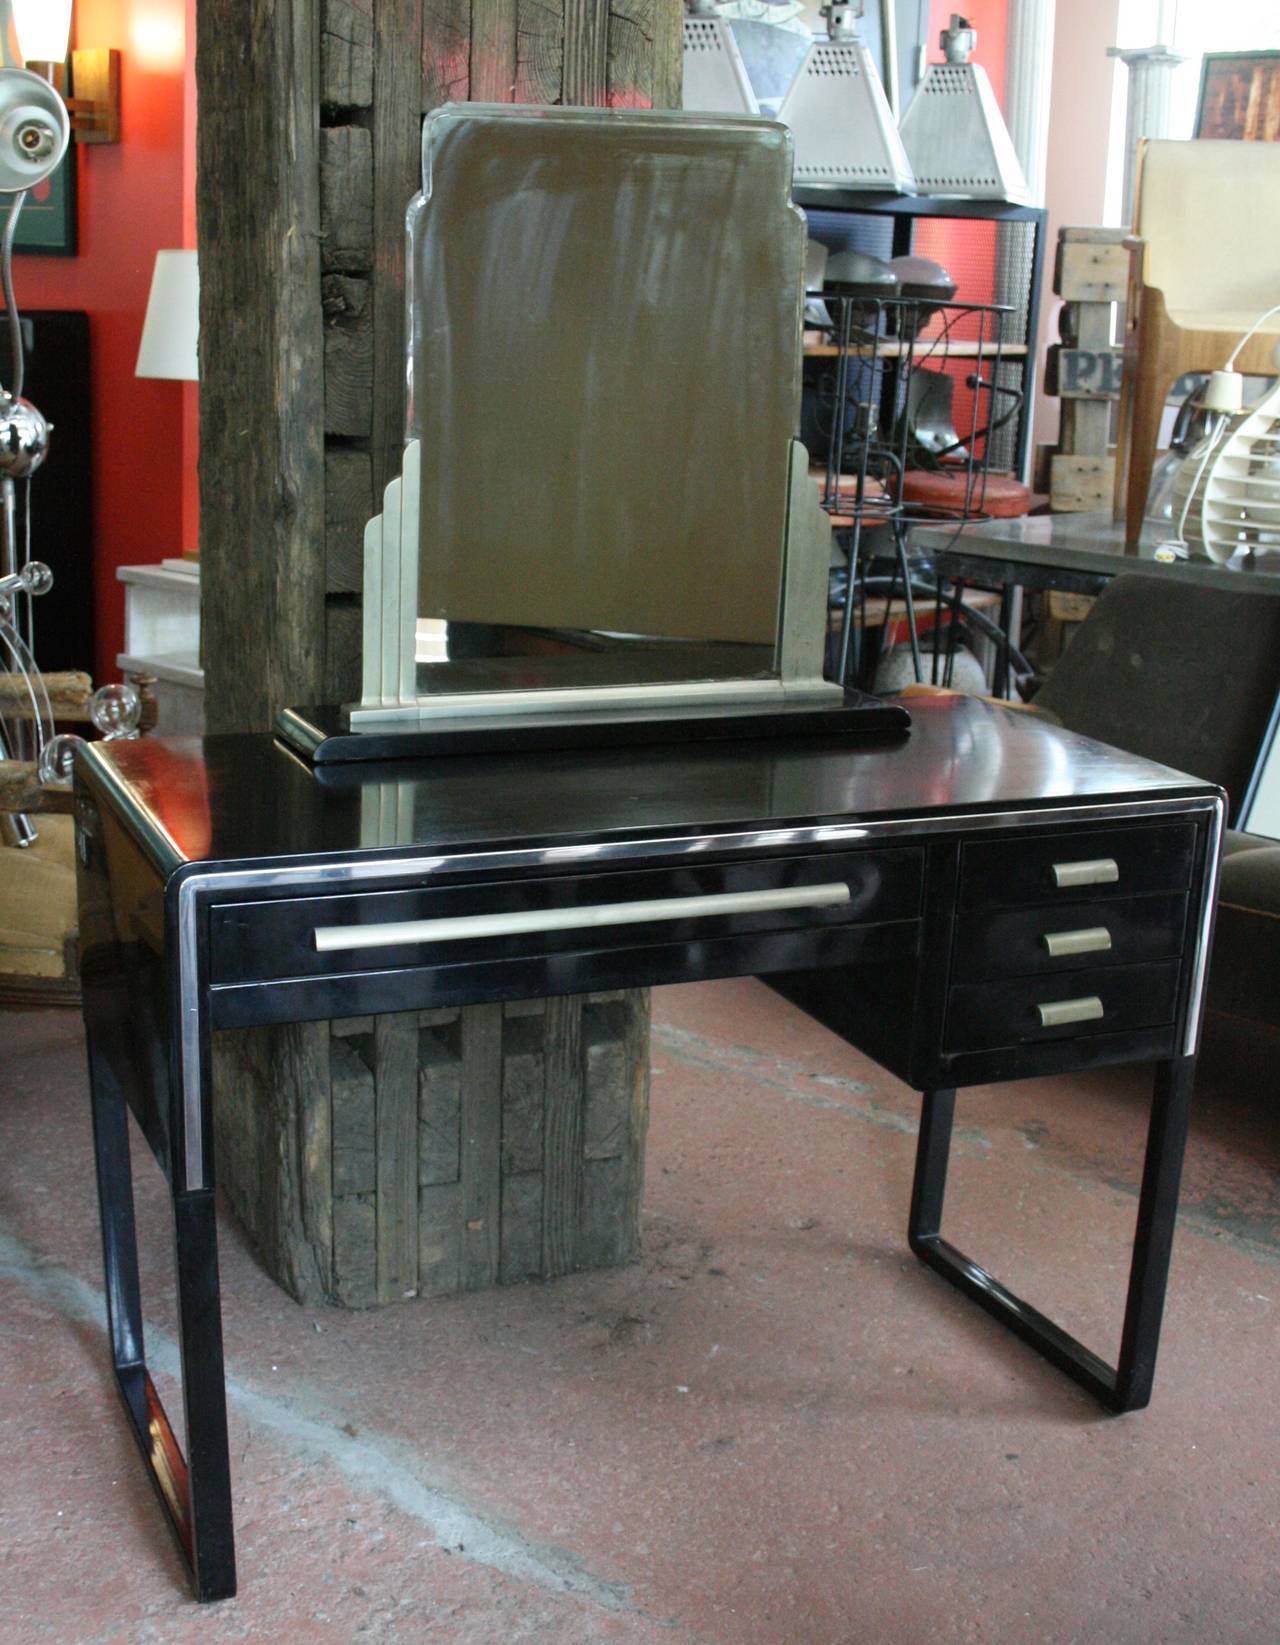 Same pieces are in the furniture collection at the Metropolitan Museum of Art in New York. Enameled and chrome-plated steel dressing table, mirror and chair (see image 3). Excellent examples of American Art Deco, rare to find these three pieces